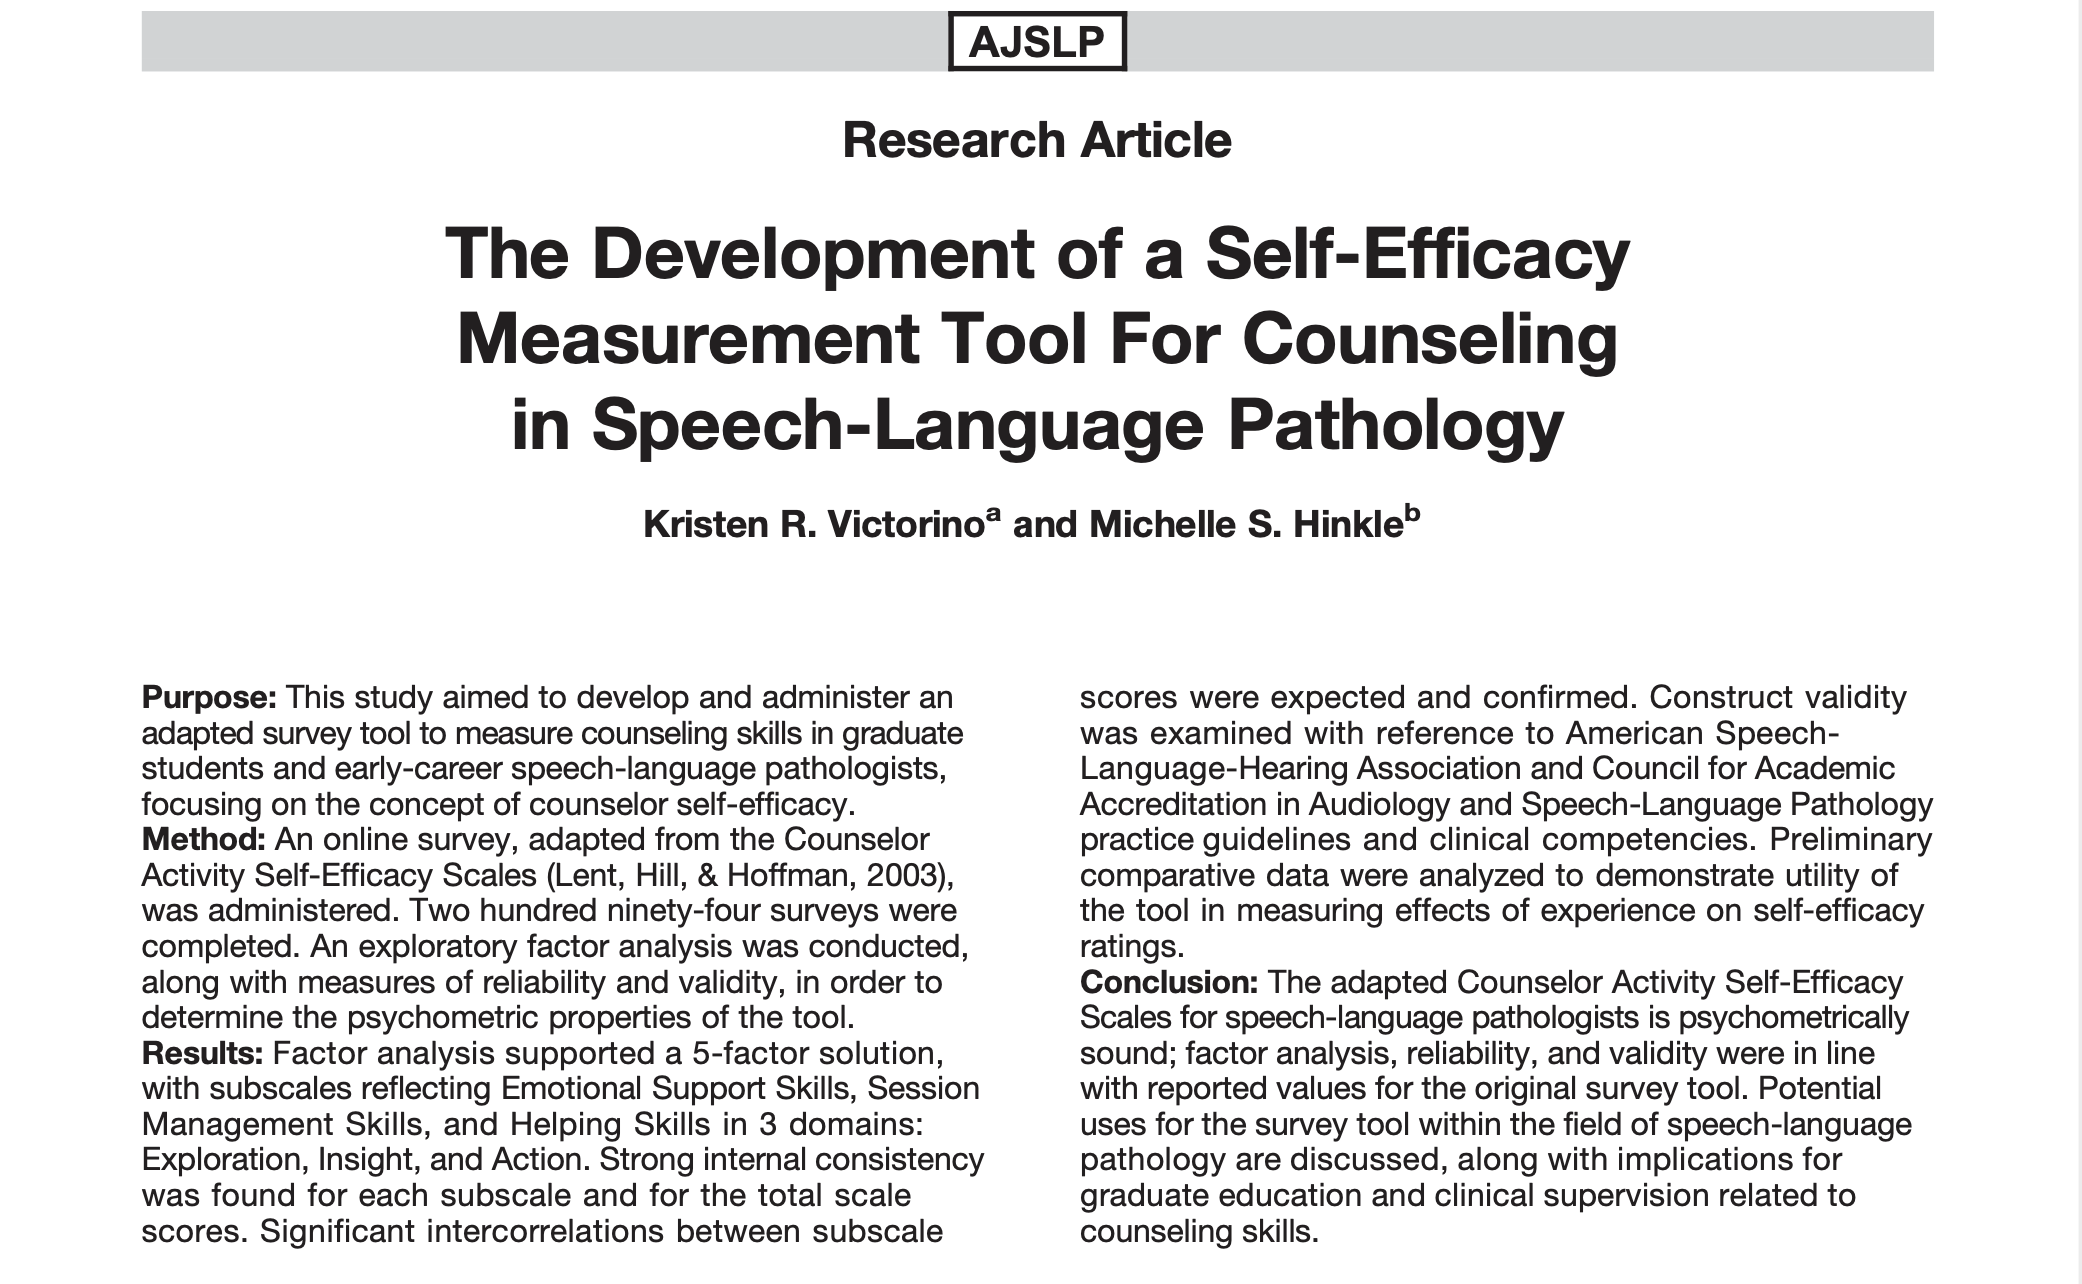 Image of the top portion of a research journal article. The article is Victorino, K. R. & Hinkle, M. S. (2019). The development of a self-efficacy measurement tool for counseling in speech-language pathology. The image shows information on the source type, article title, authors, and article summary information.